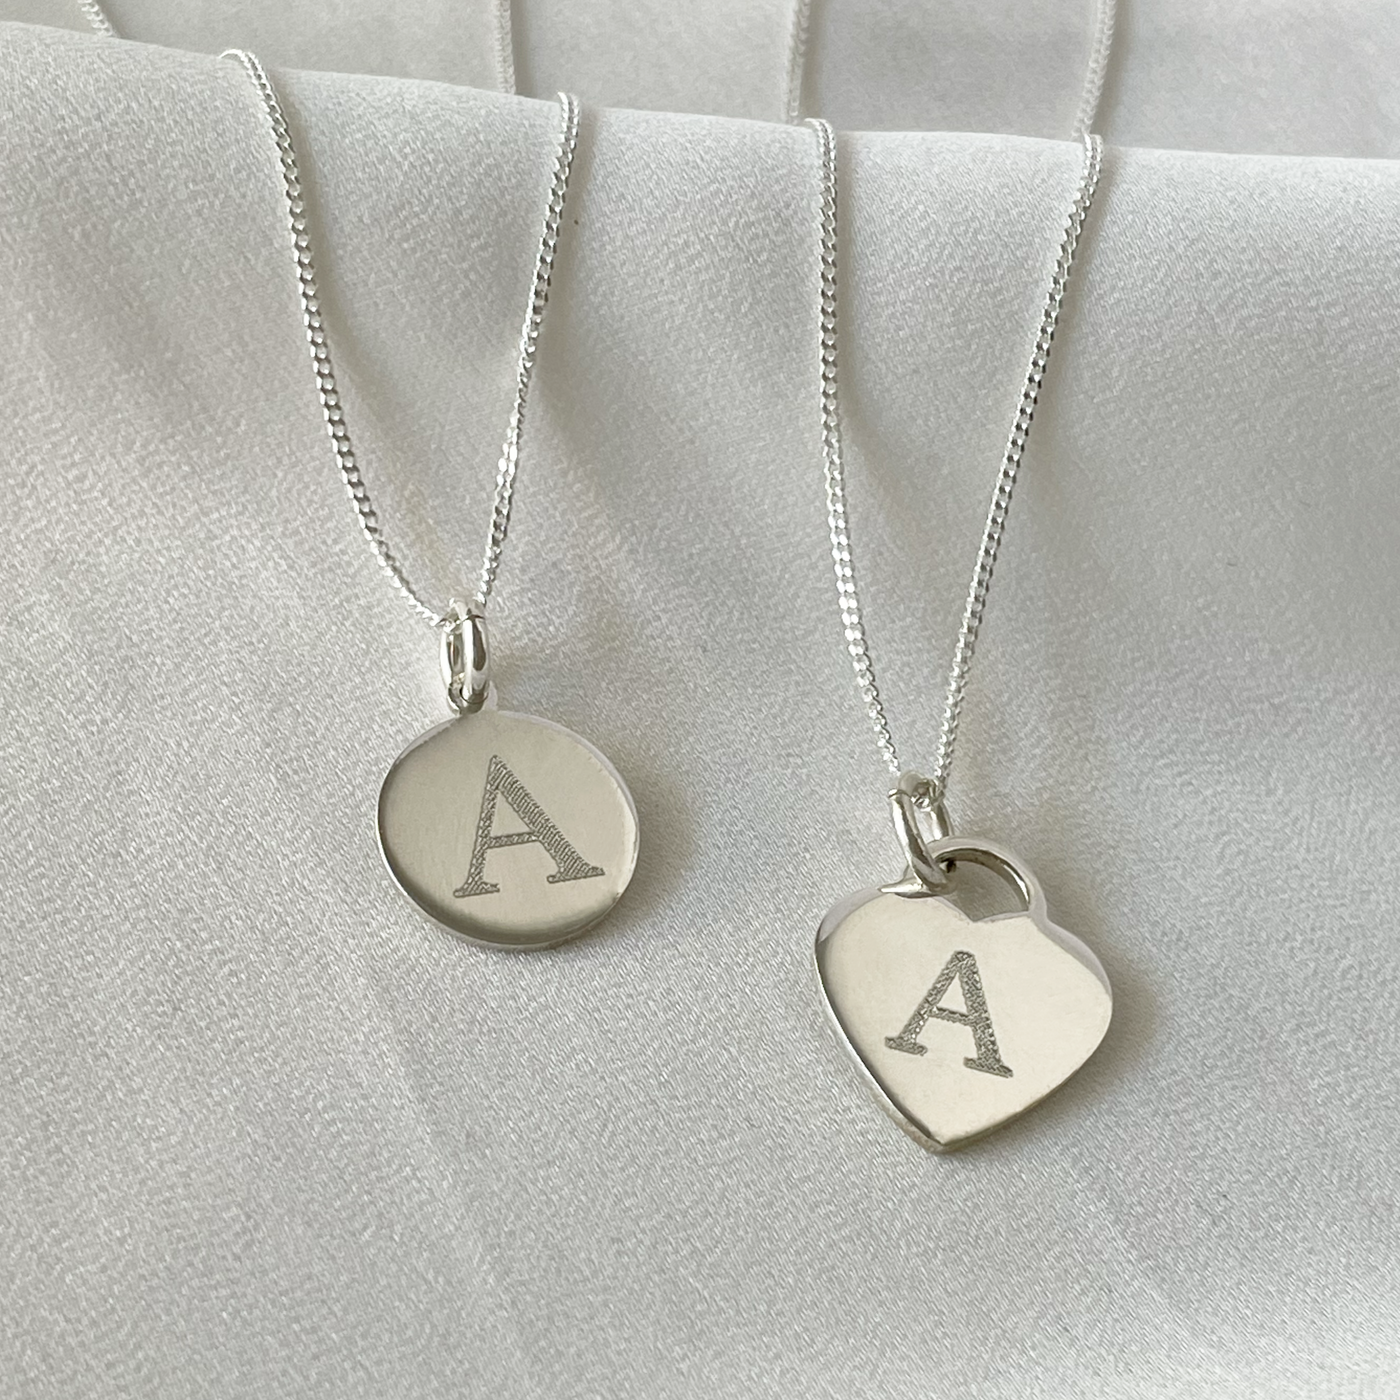 PERSONAOZED INITIAL DISC NECKLACE